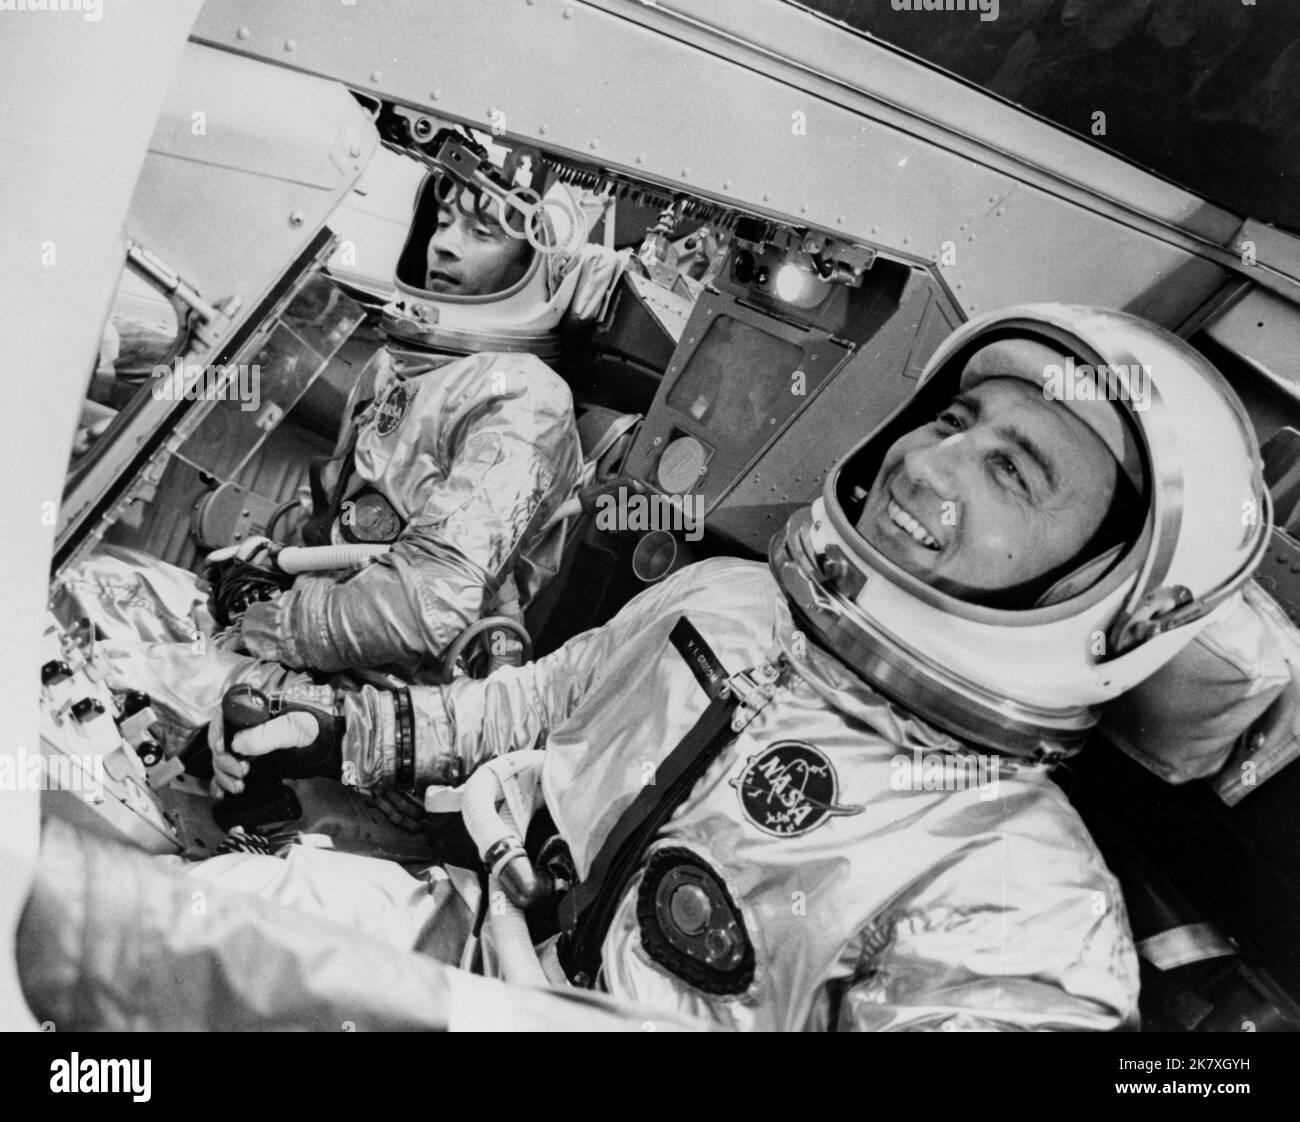 Astronauts Virgil I. “Gus” Grissom and John W. Young participated in the first crewed Gemini flight, Gemini III. Stock Photo